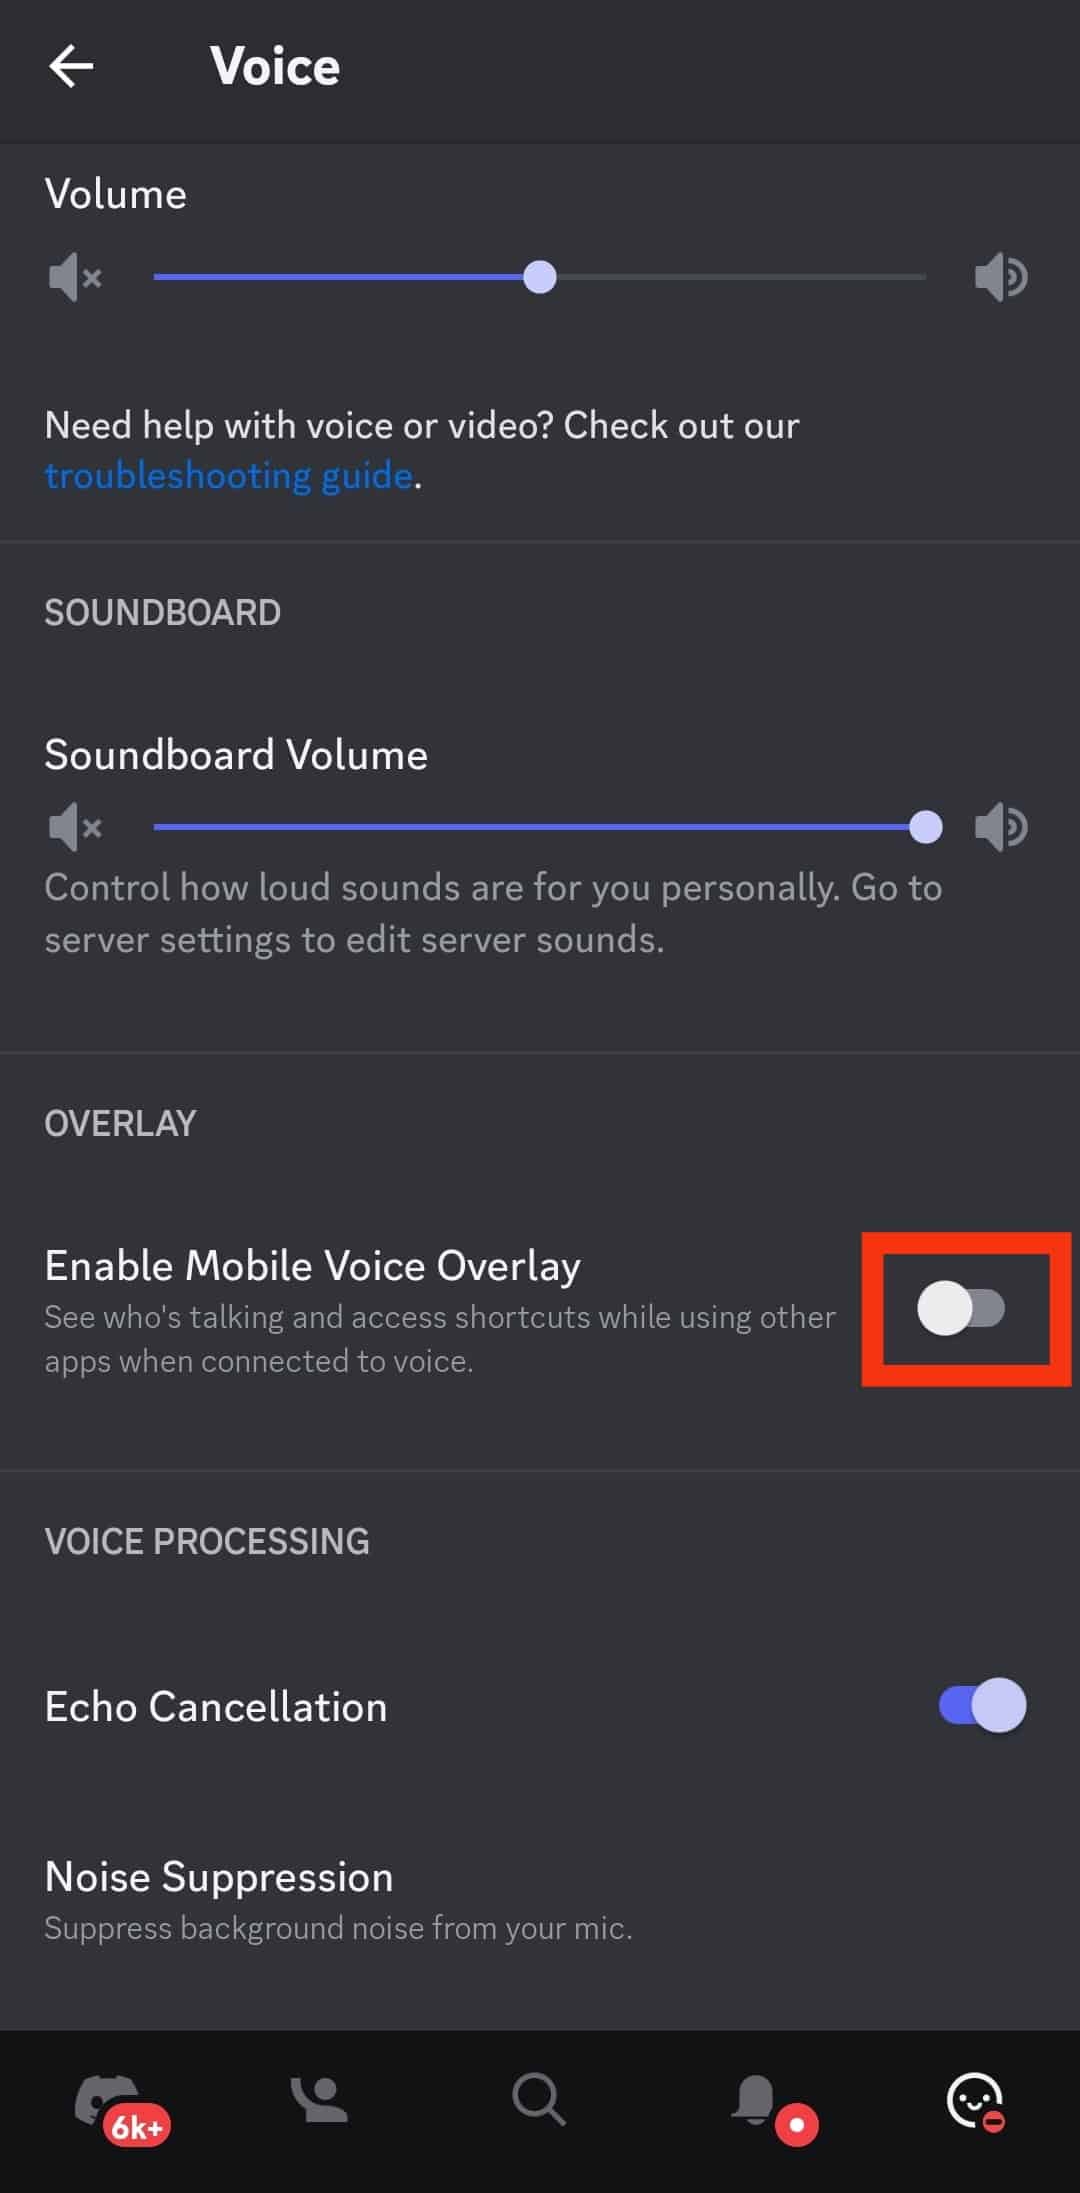 Toggle On Enable Mobile Voice Overlay